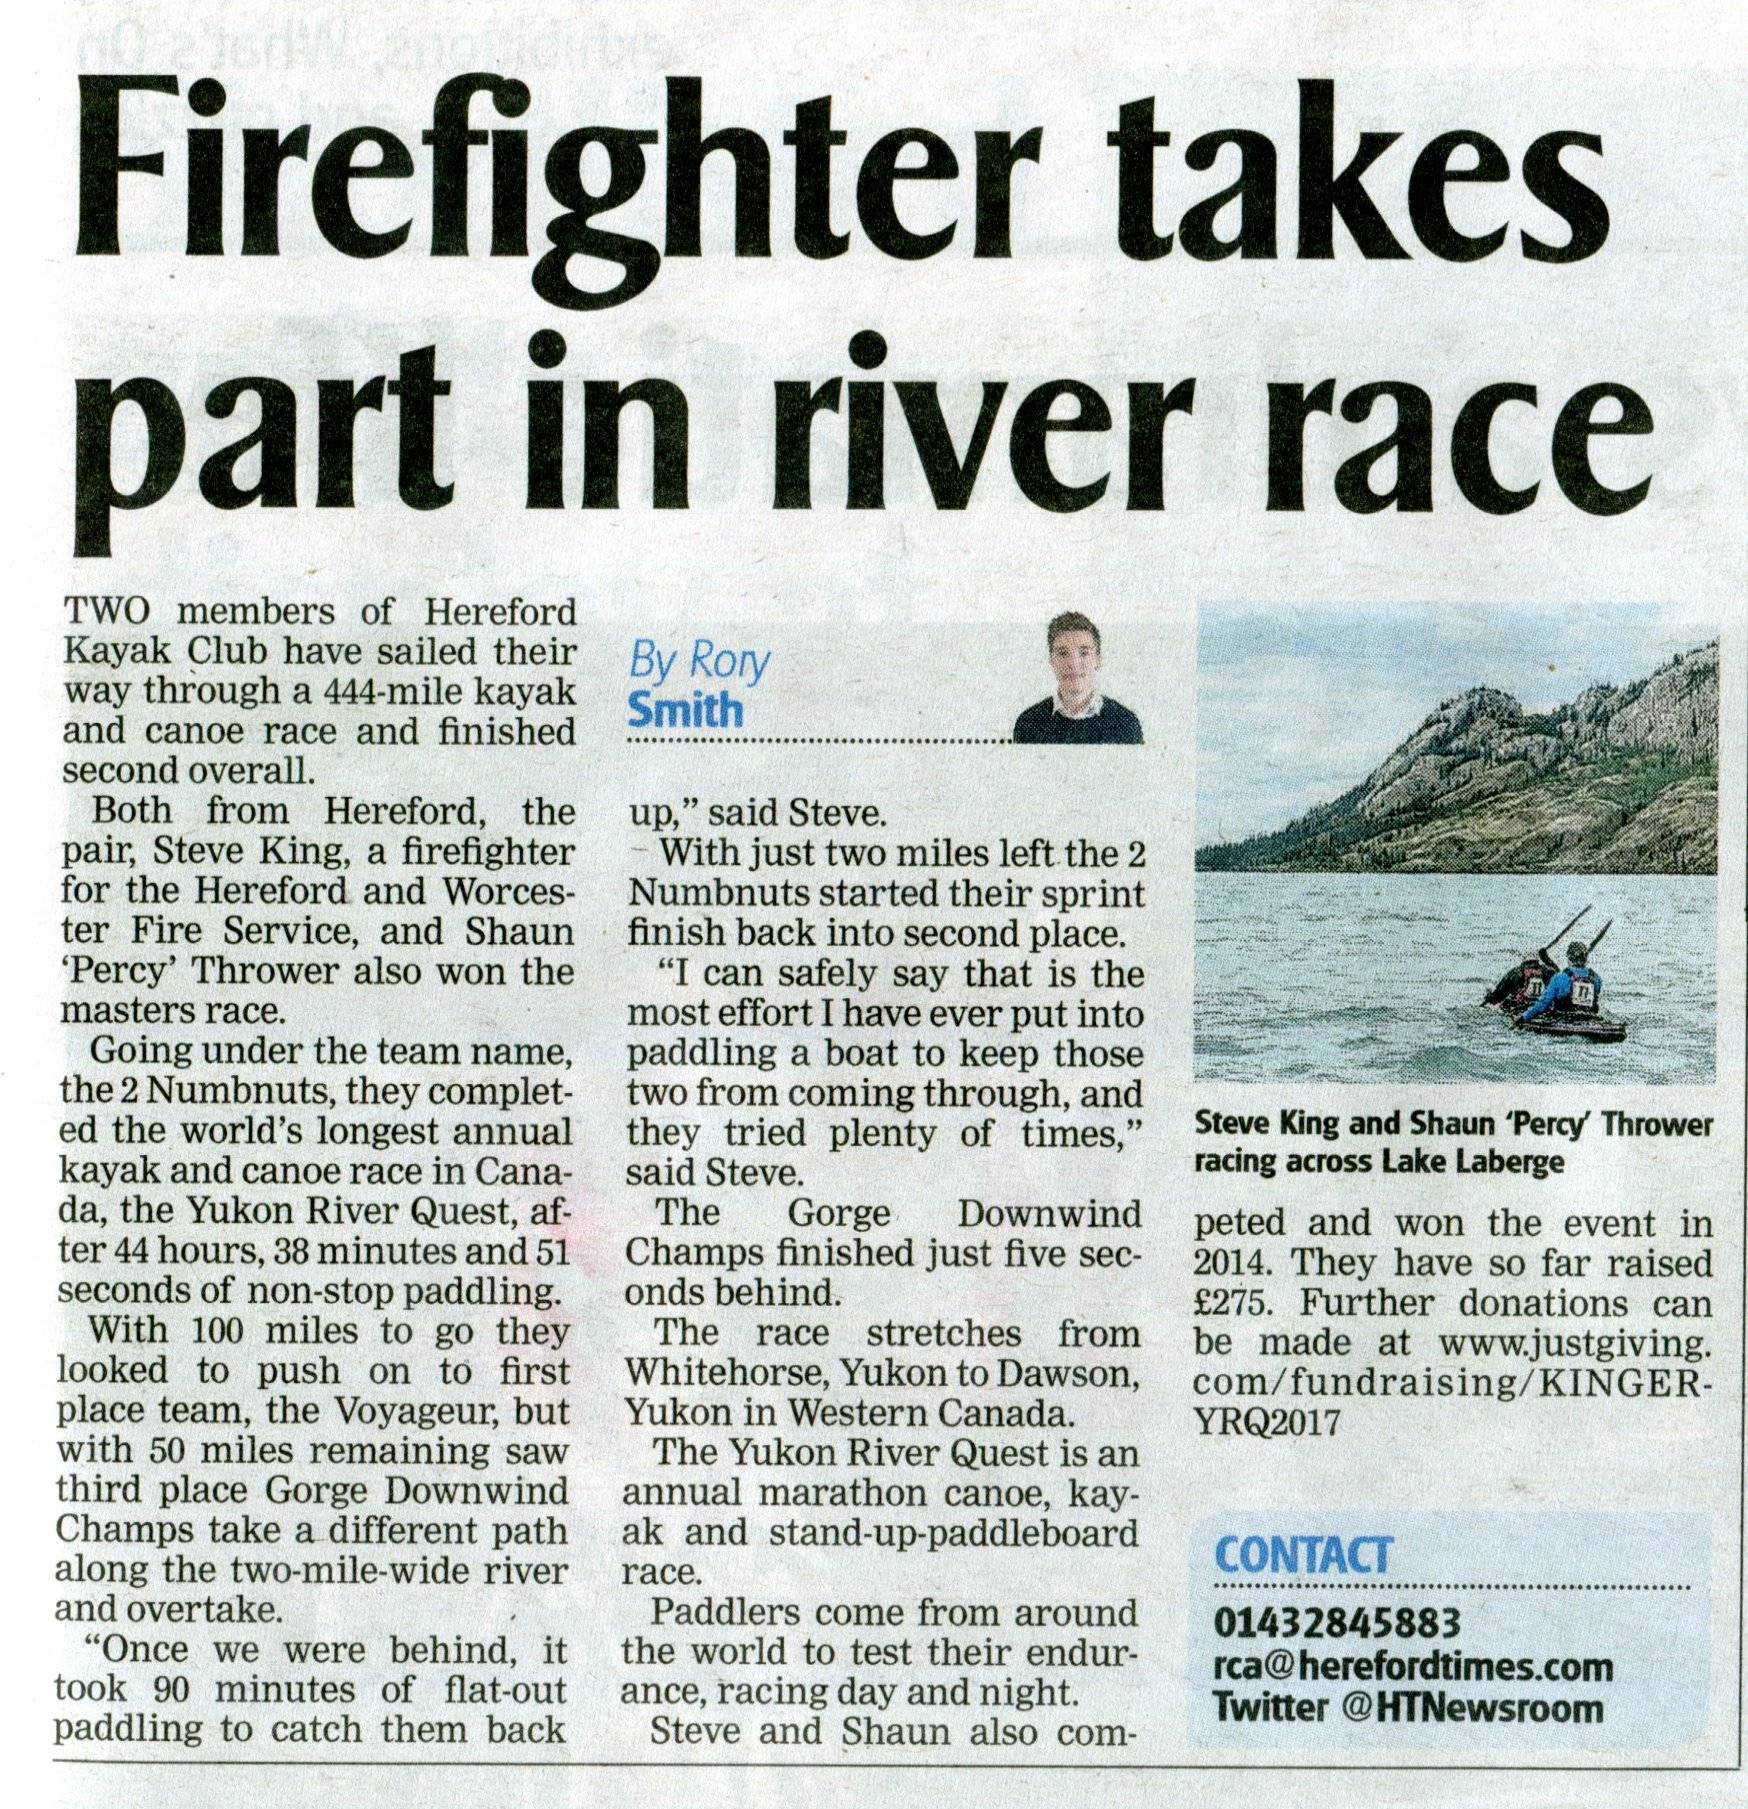 Firefighter takes part in river race